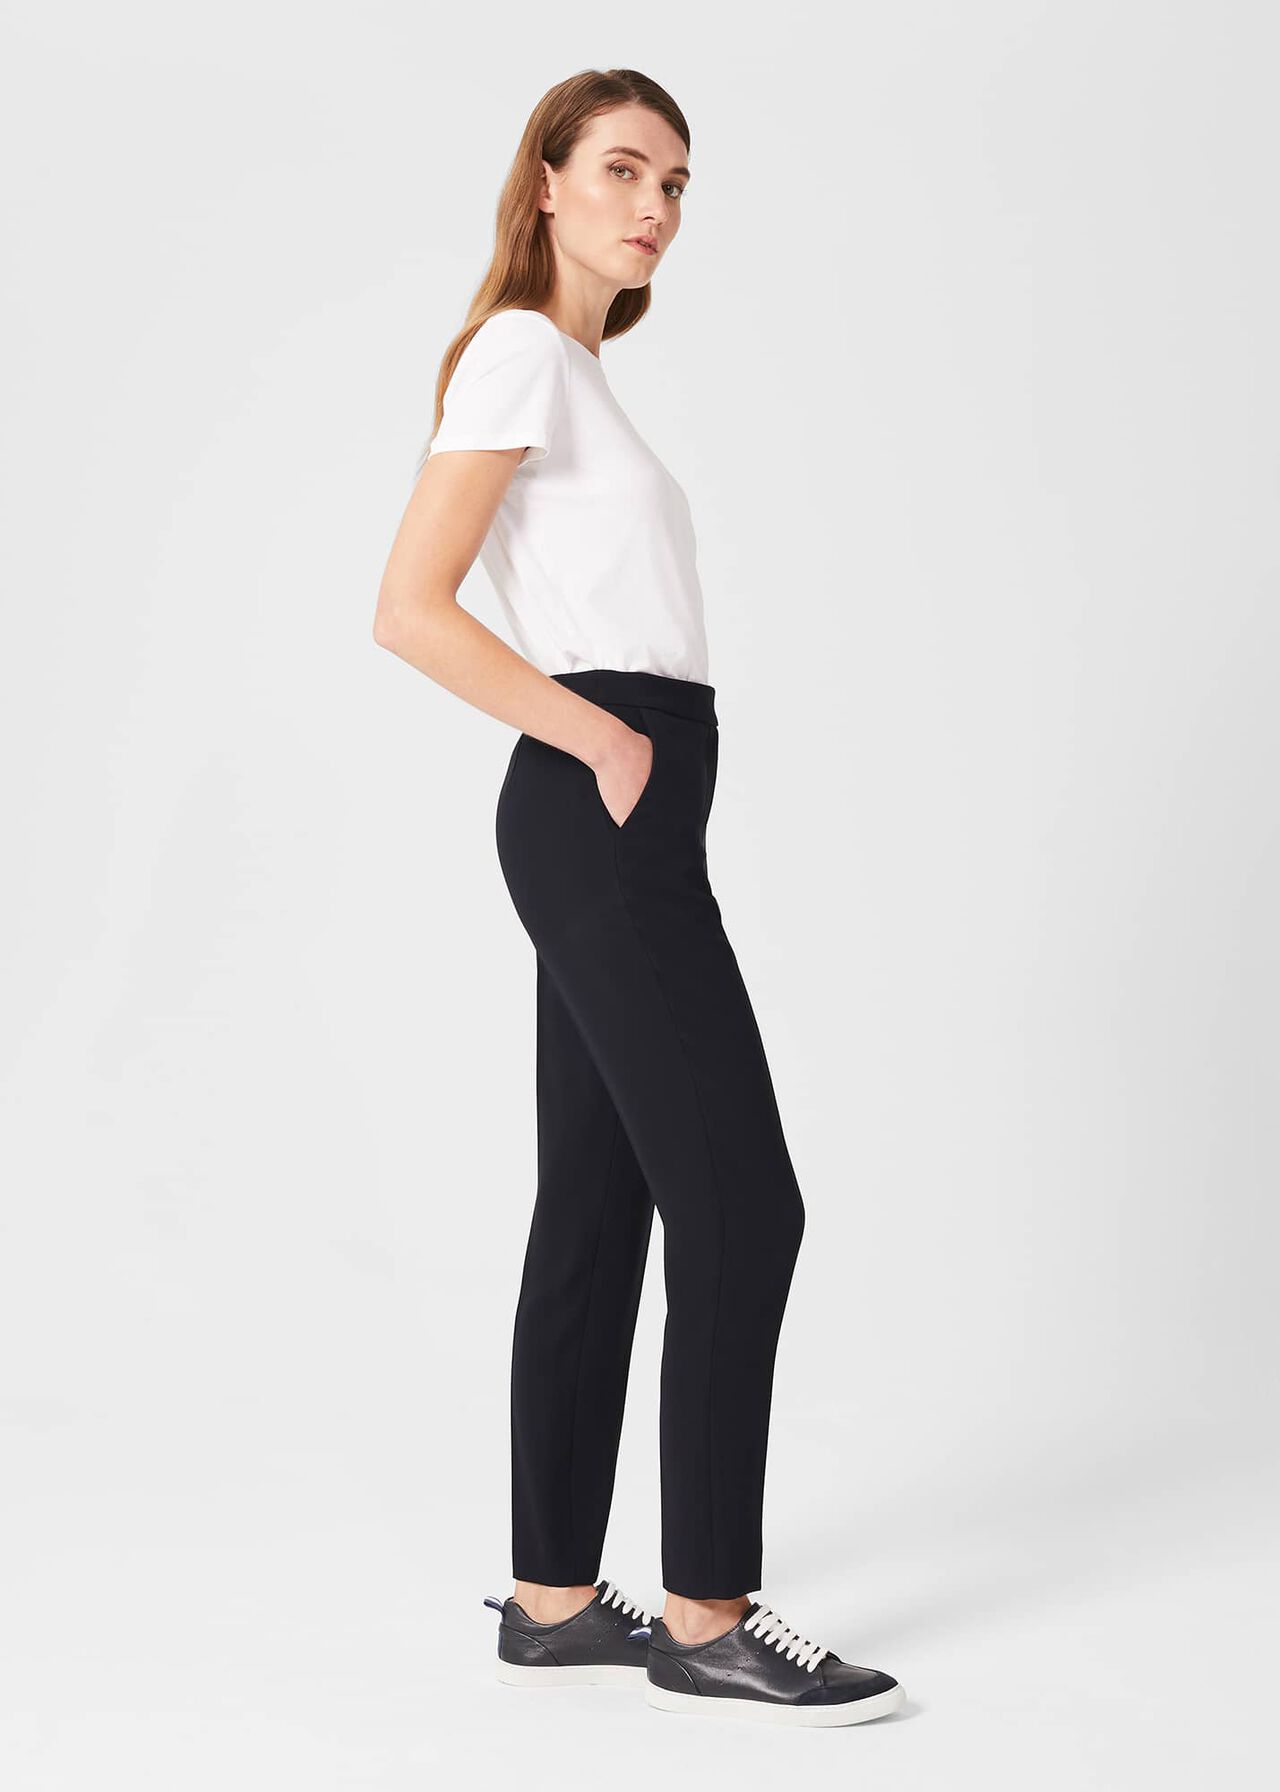 Abigail Tapered Trousers, Navy, hi-res